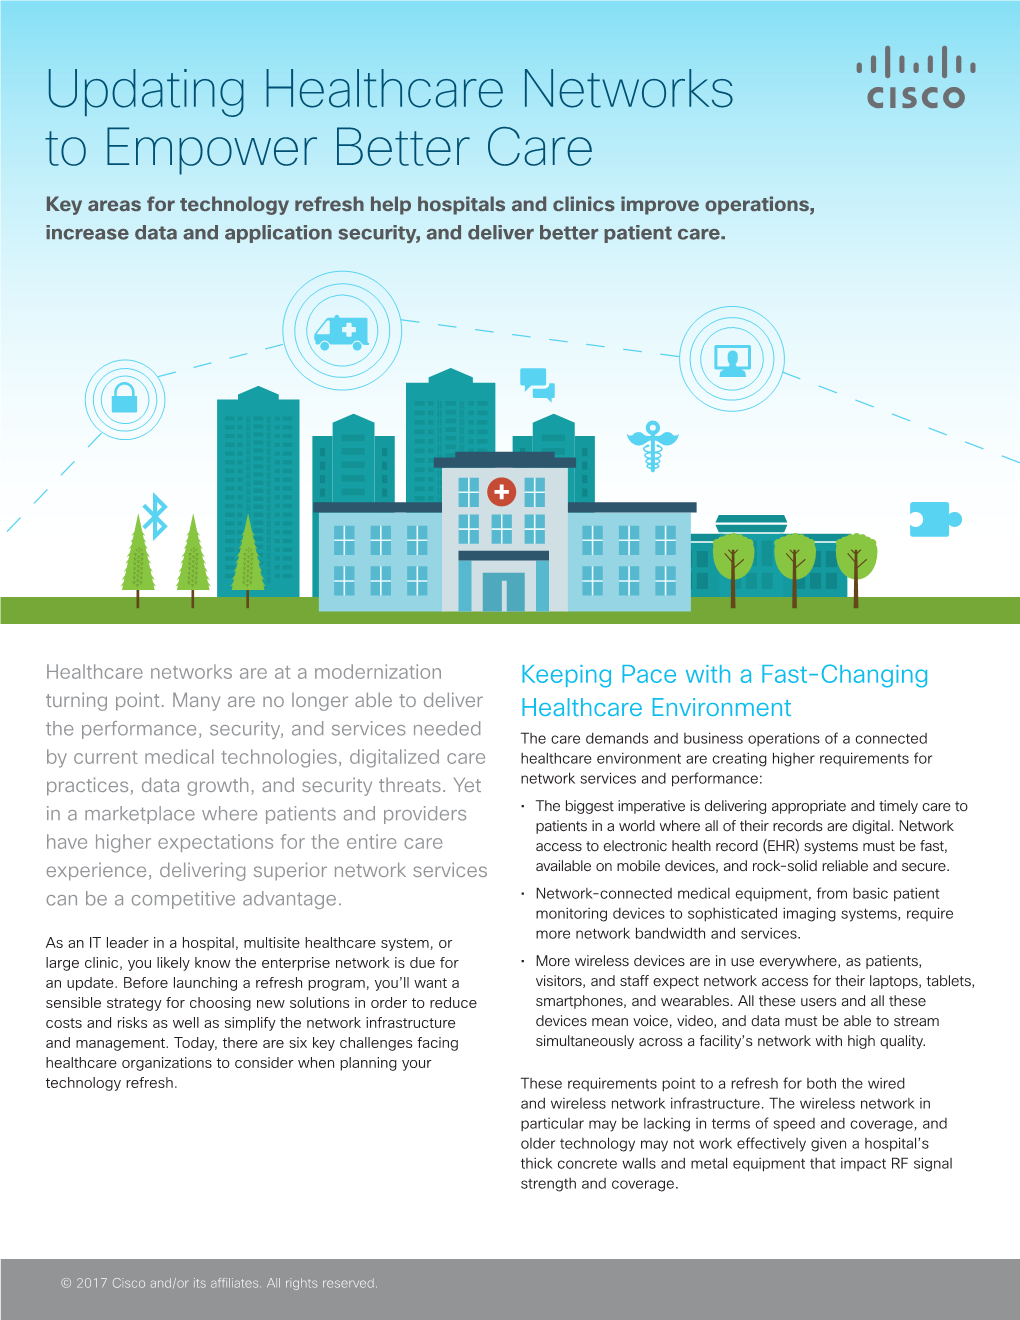 Updating Healthcare Networks to Empower Better Care